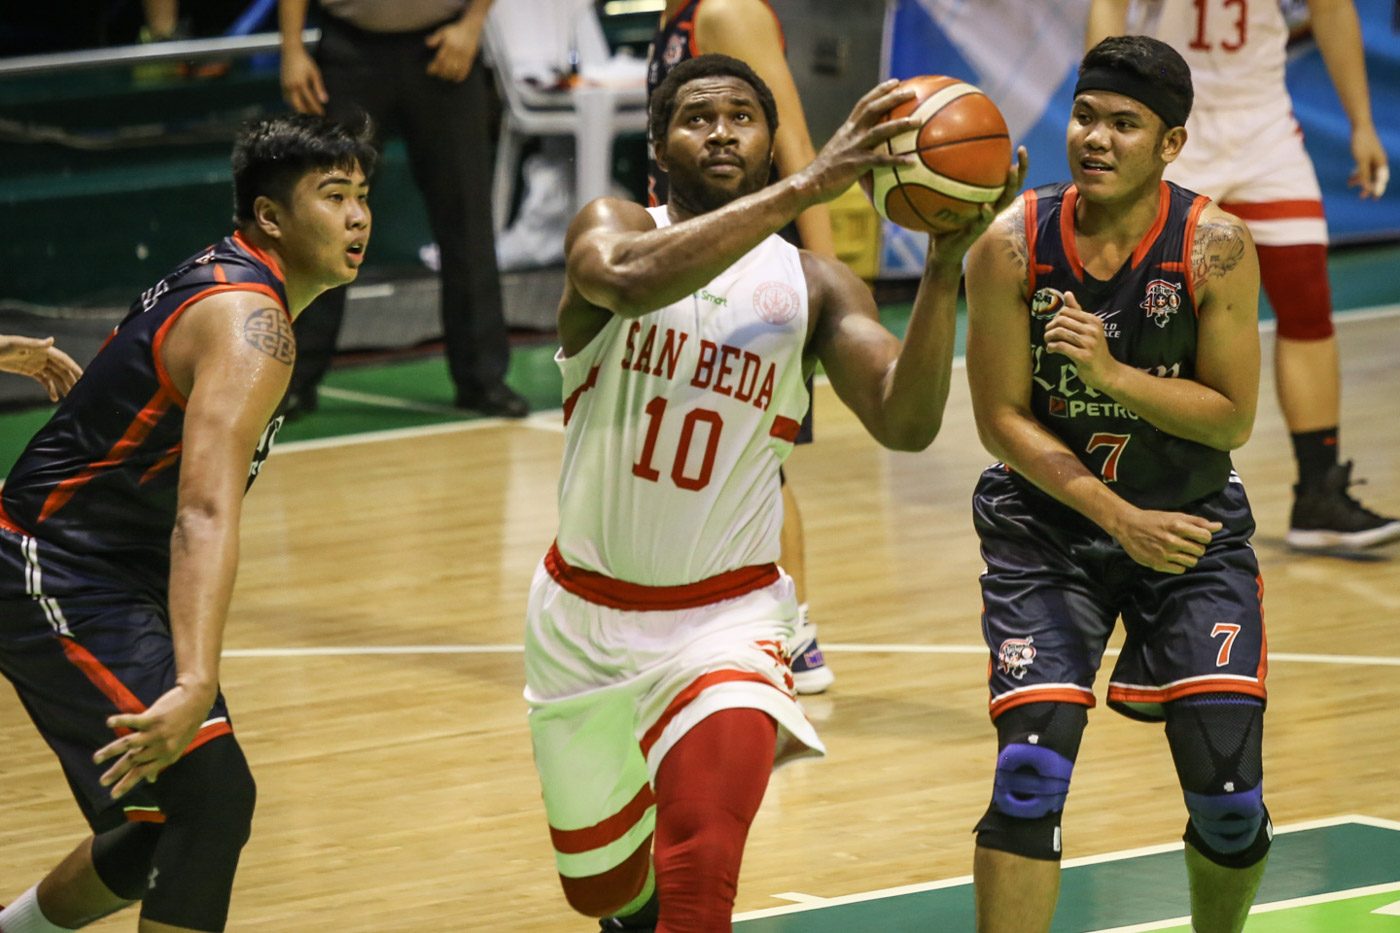 San Beda tops Letran to stay perfect